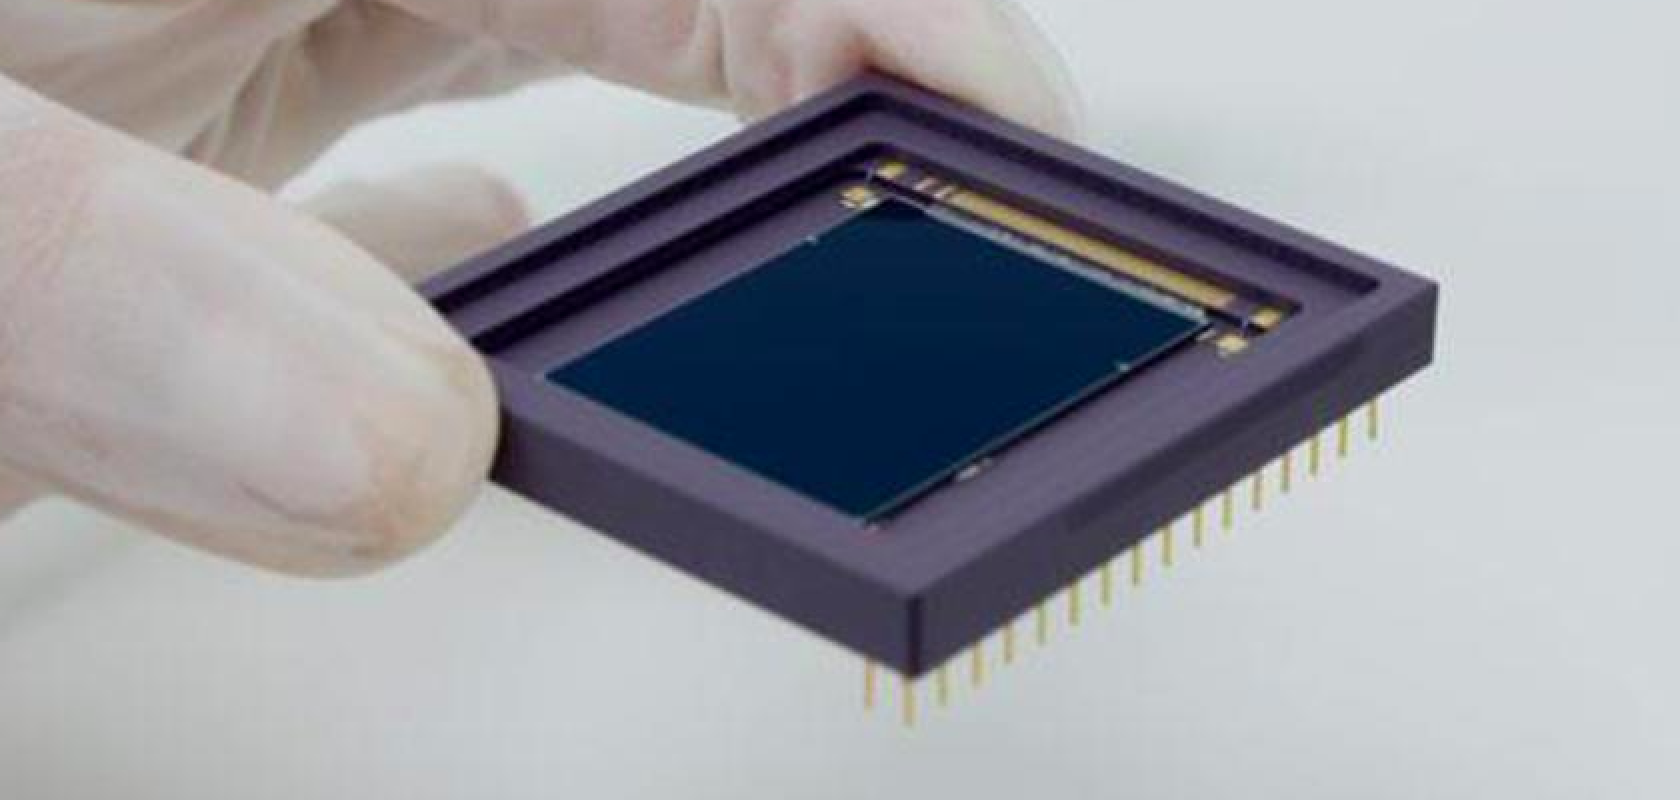 Teledyne e2v’s CMOS image sensors and subsystems aim to deliver high performance across multiple applications.